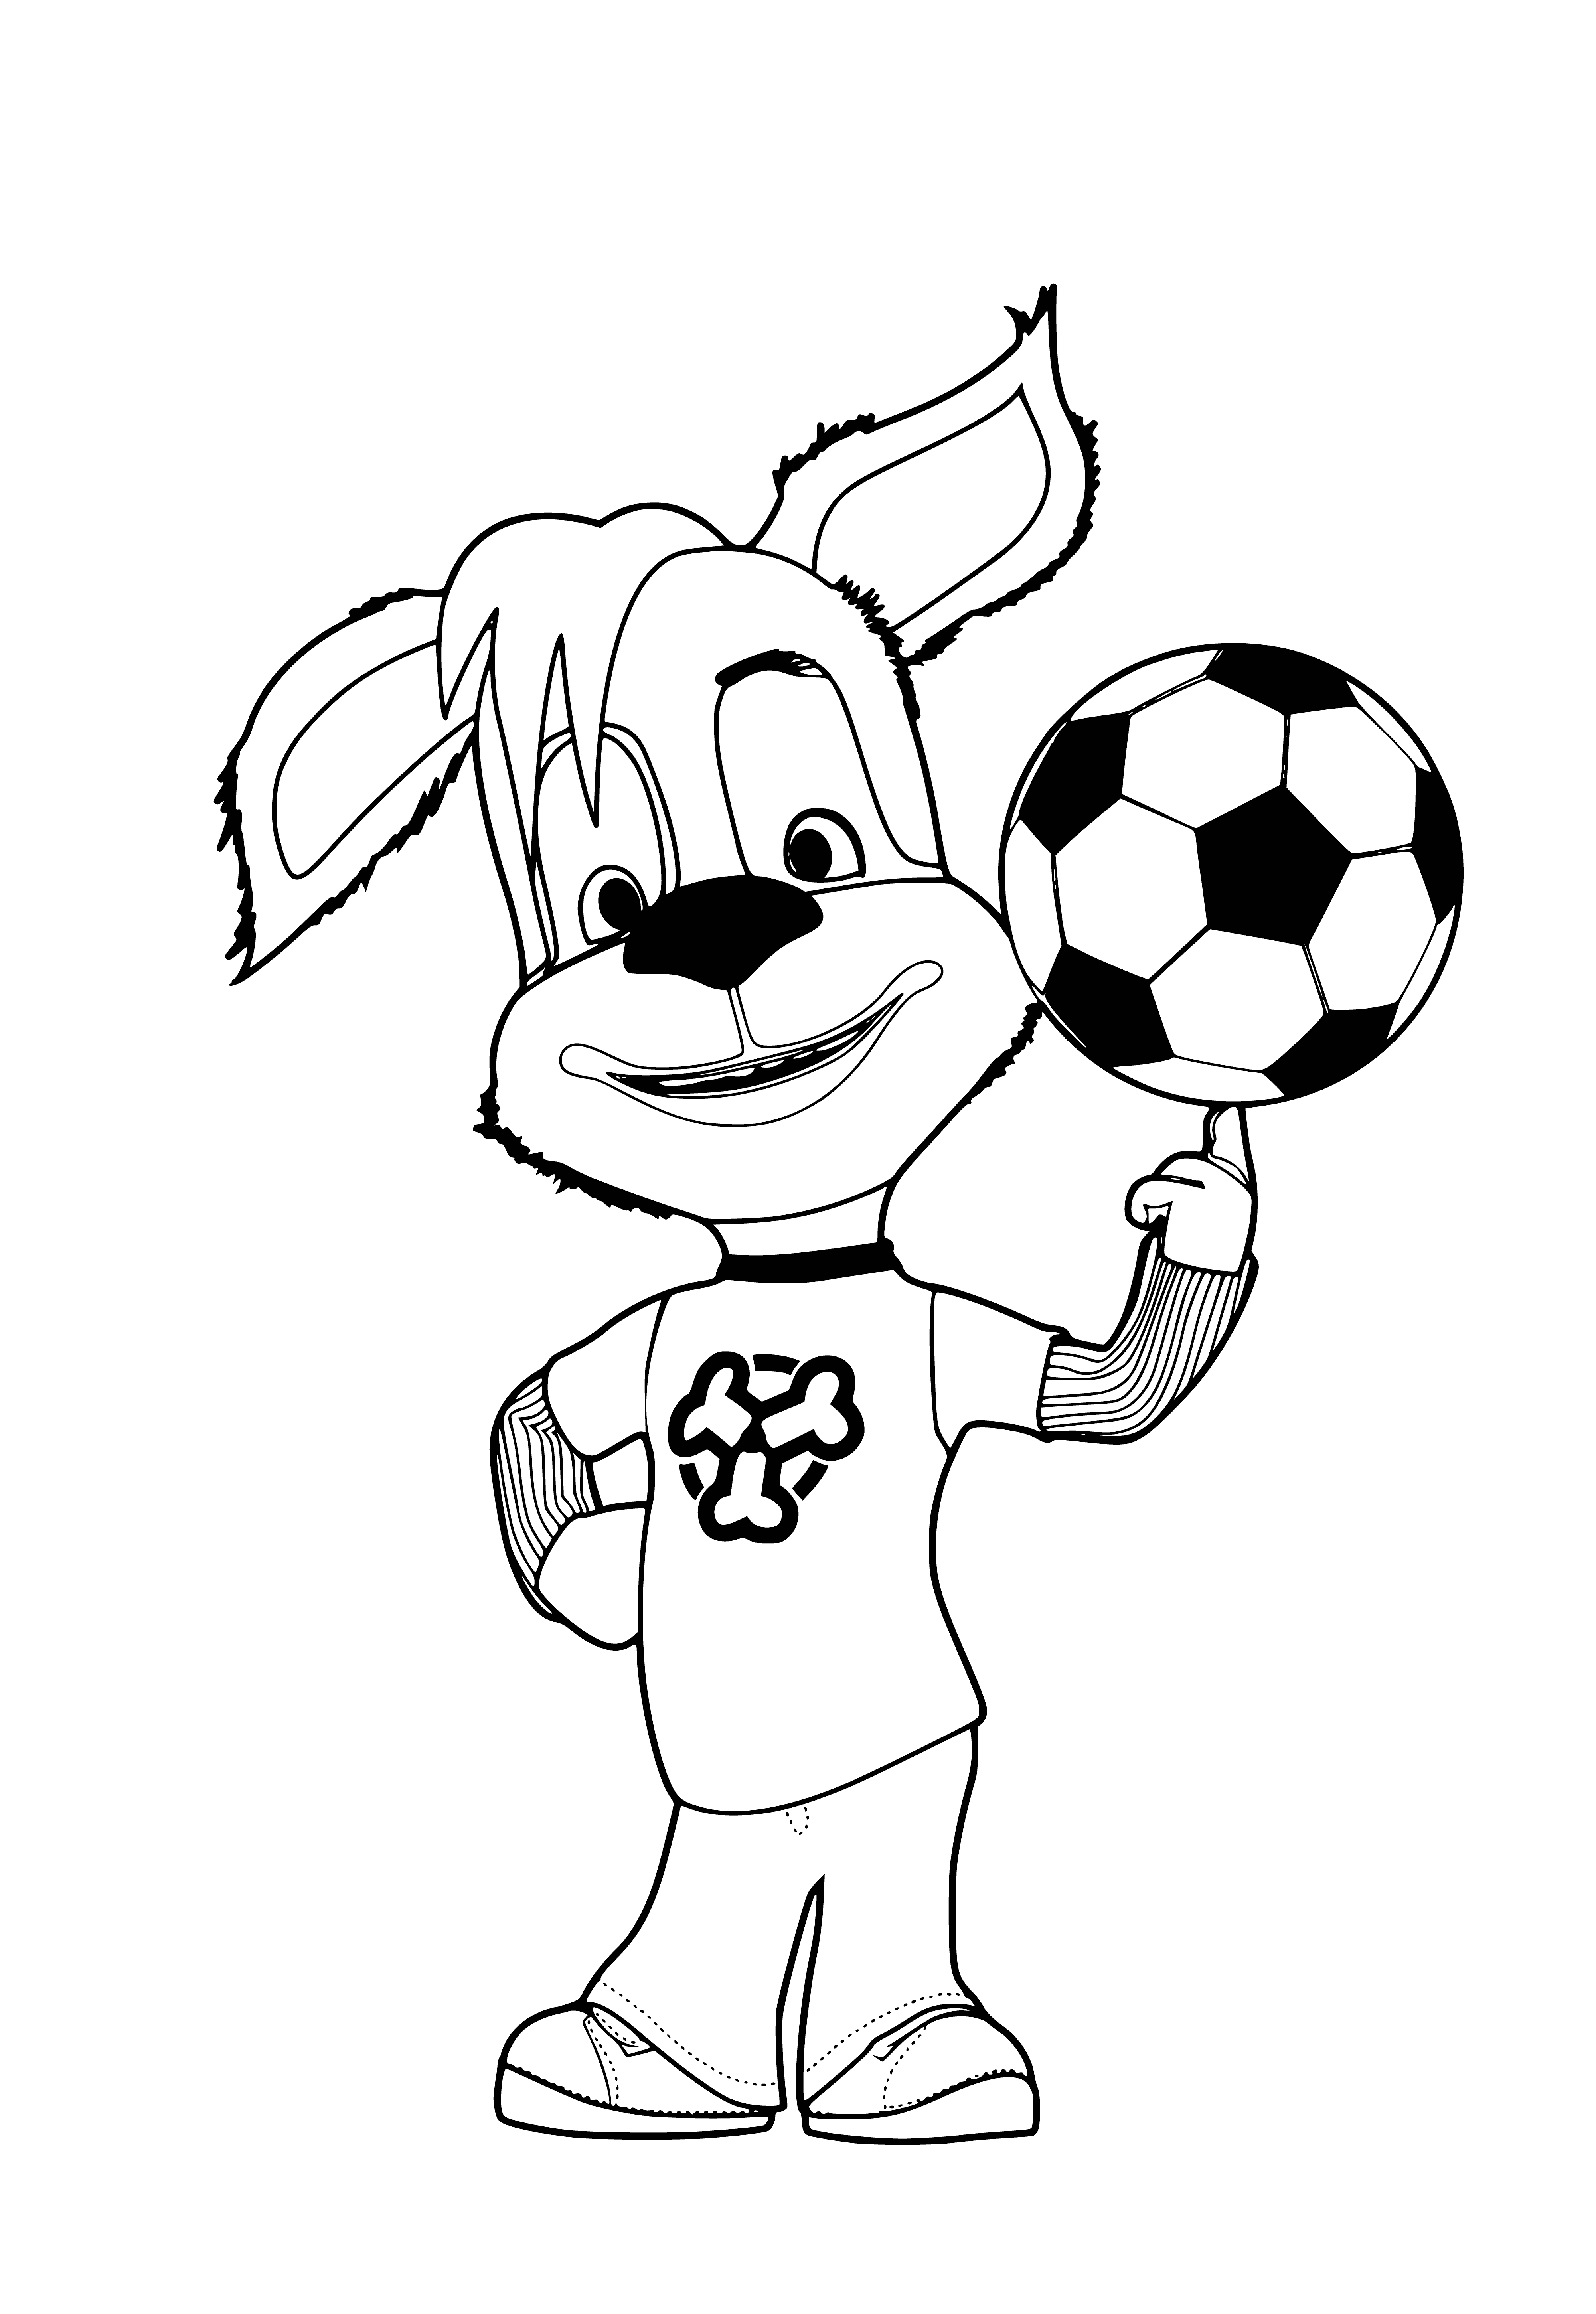 coloring page: A plush toy shaped like a ball with black eyes, open mouth showing teeth, & "Barboskins" written on front.